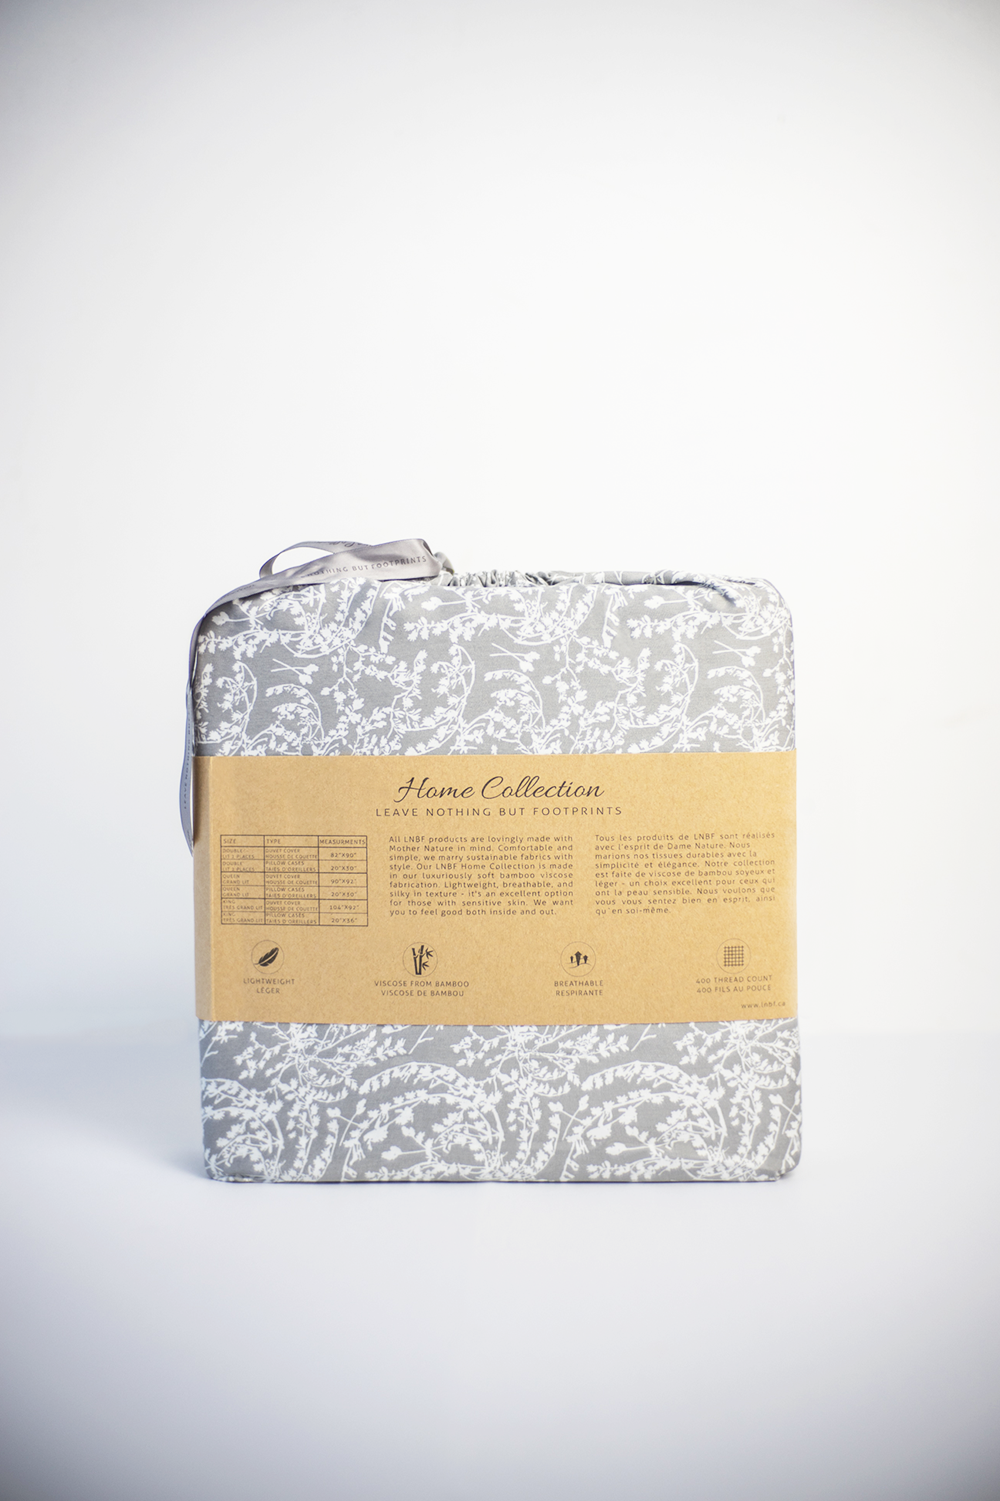 Organic Bamboo Viscose Printed Duvet Cover Set in Grey Floral - LNBF Luxury Bedding Designed in Canada